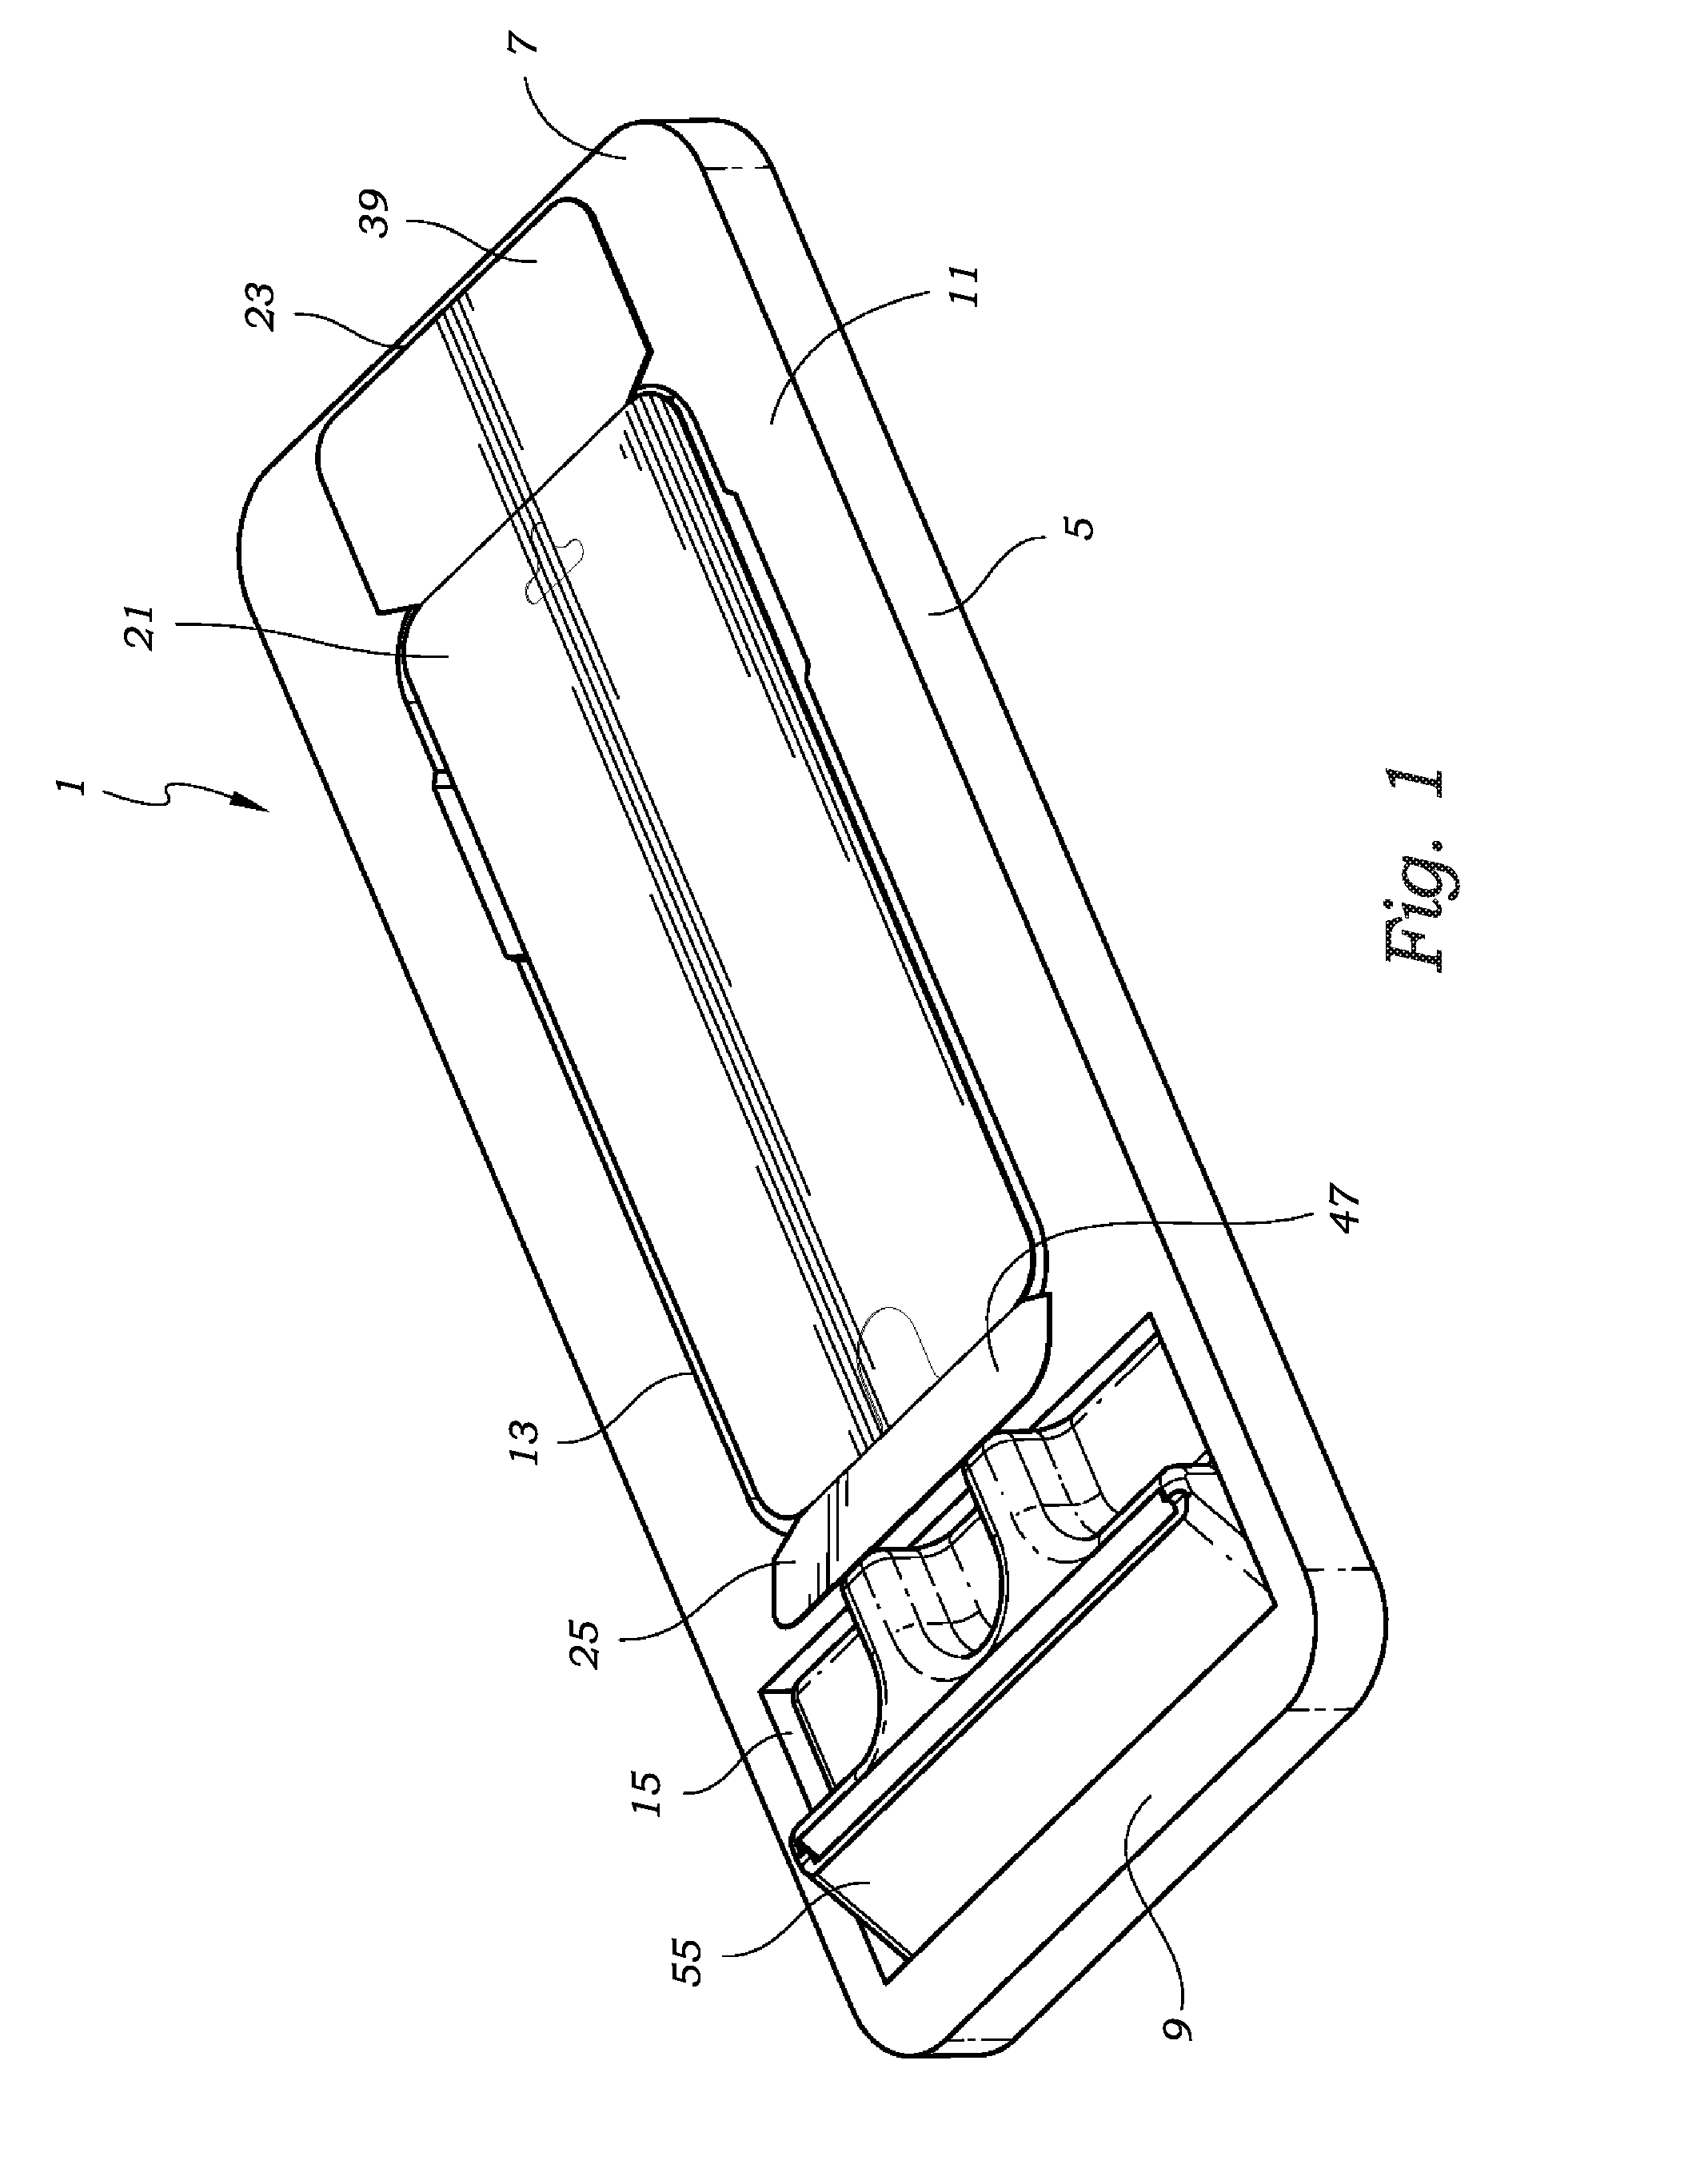 Applicator for applying protective coverings to electronic device displays